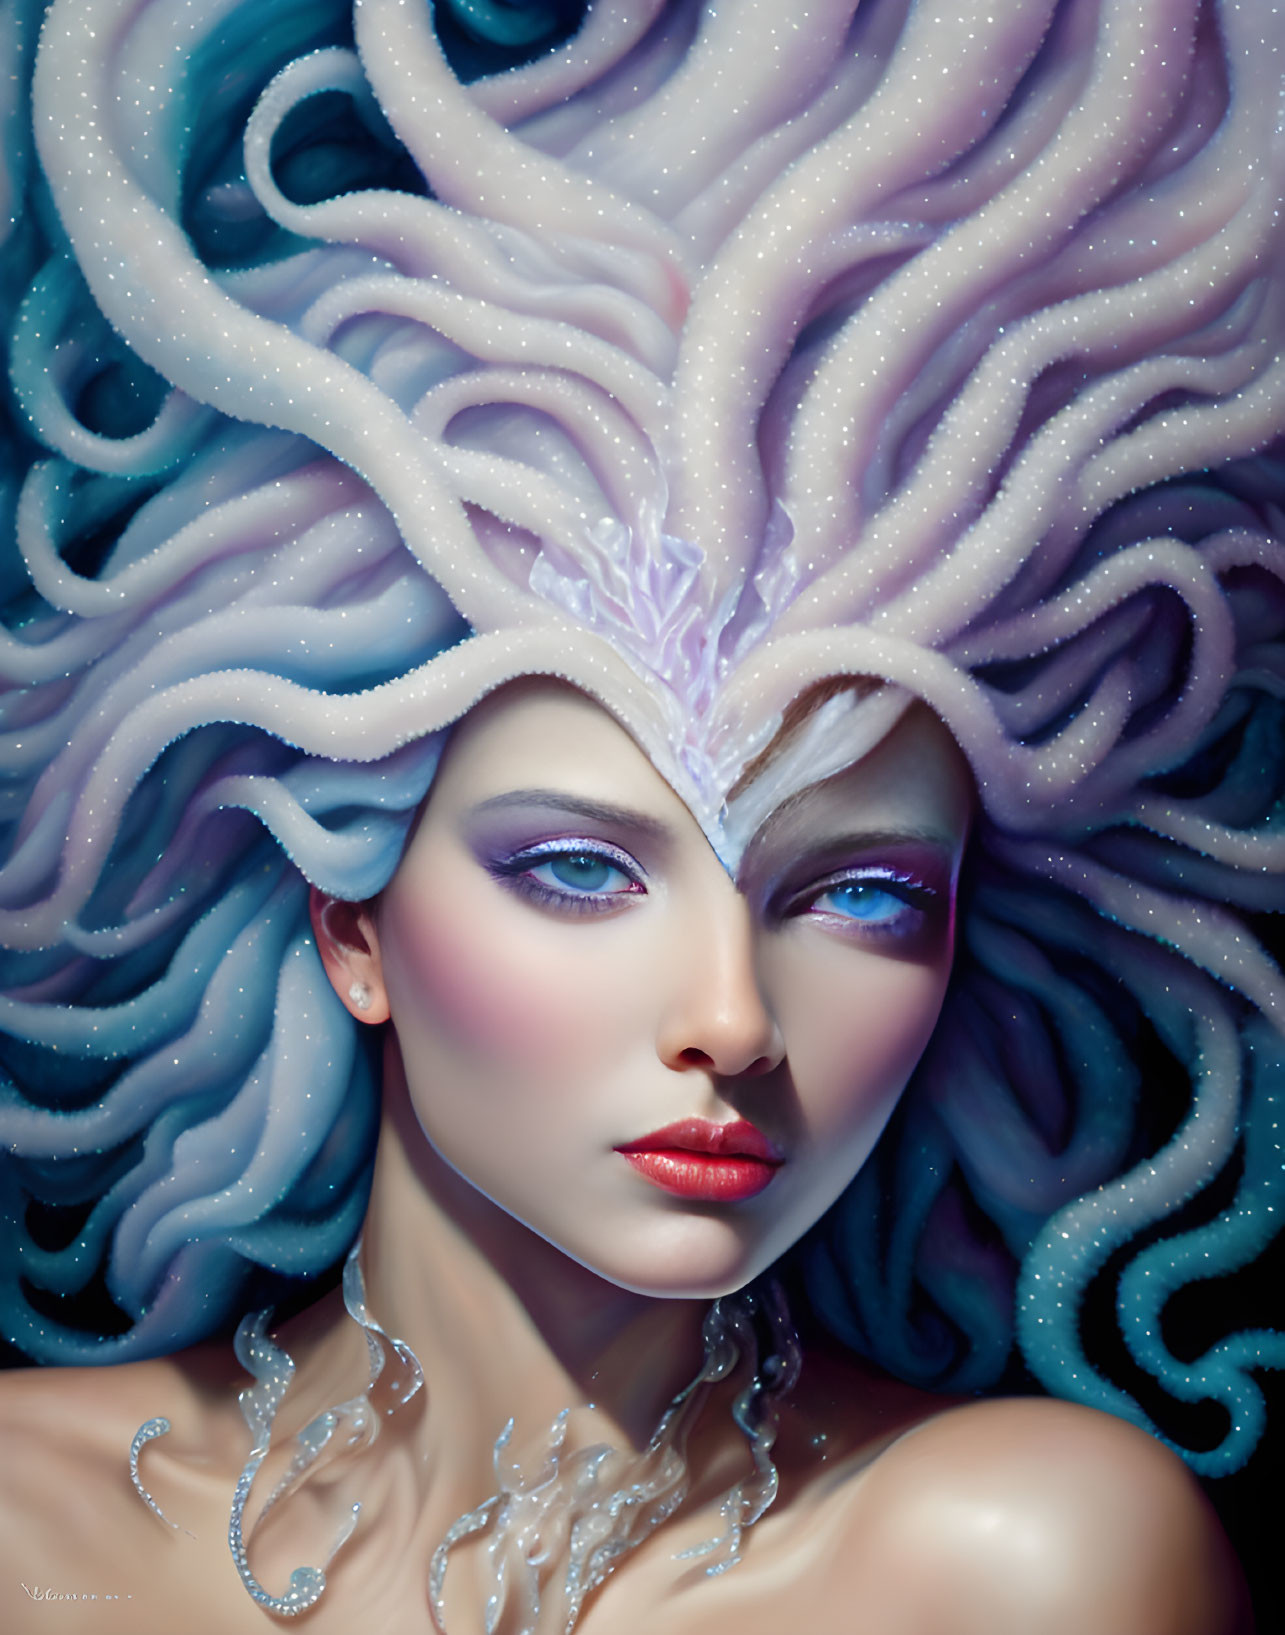 OUR LADY OF THE MANY FORMS - MEDUSA 02282023